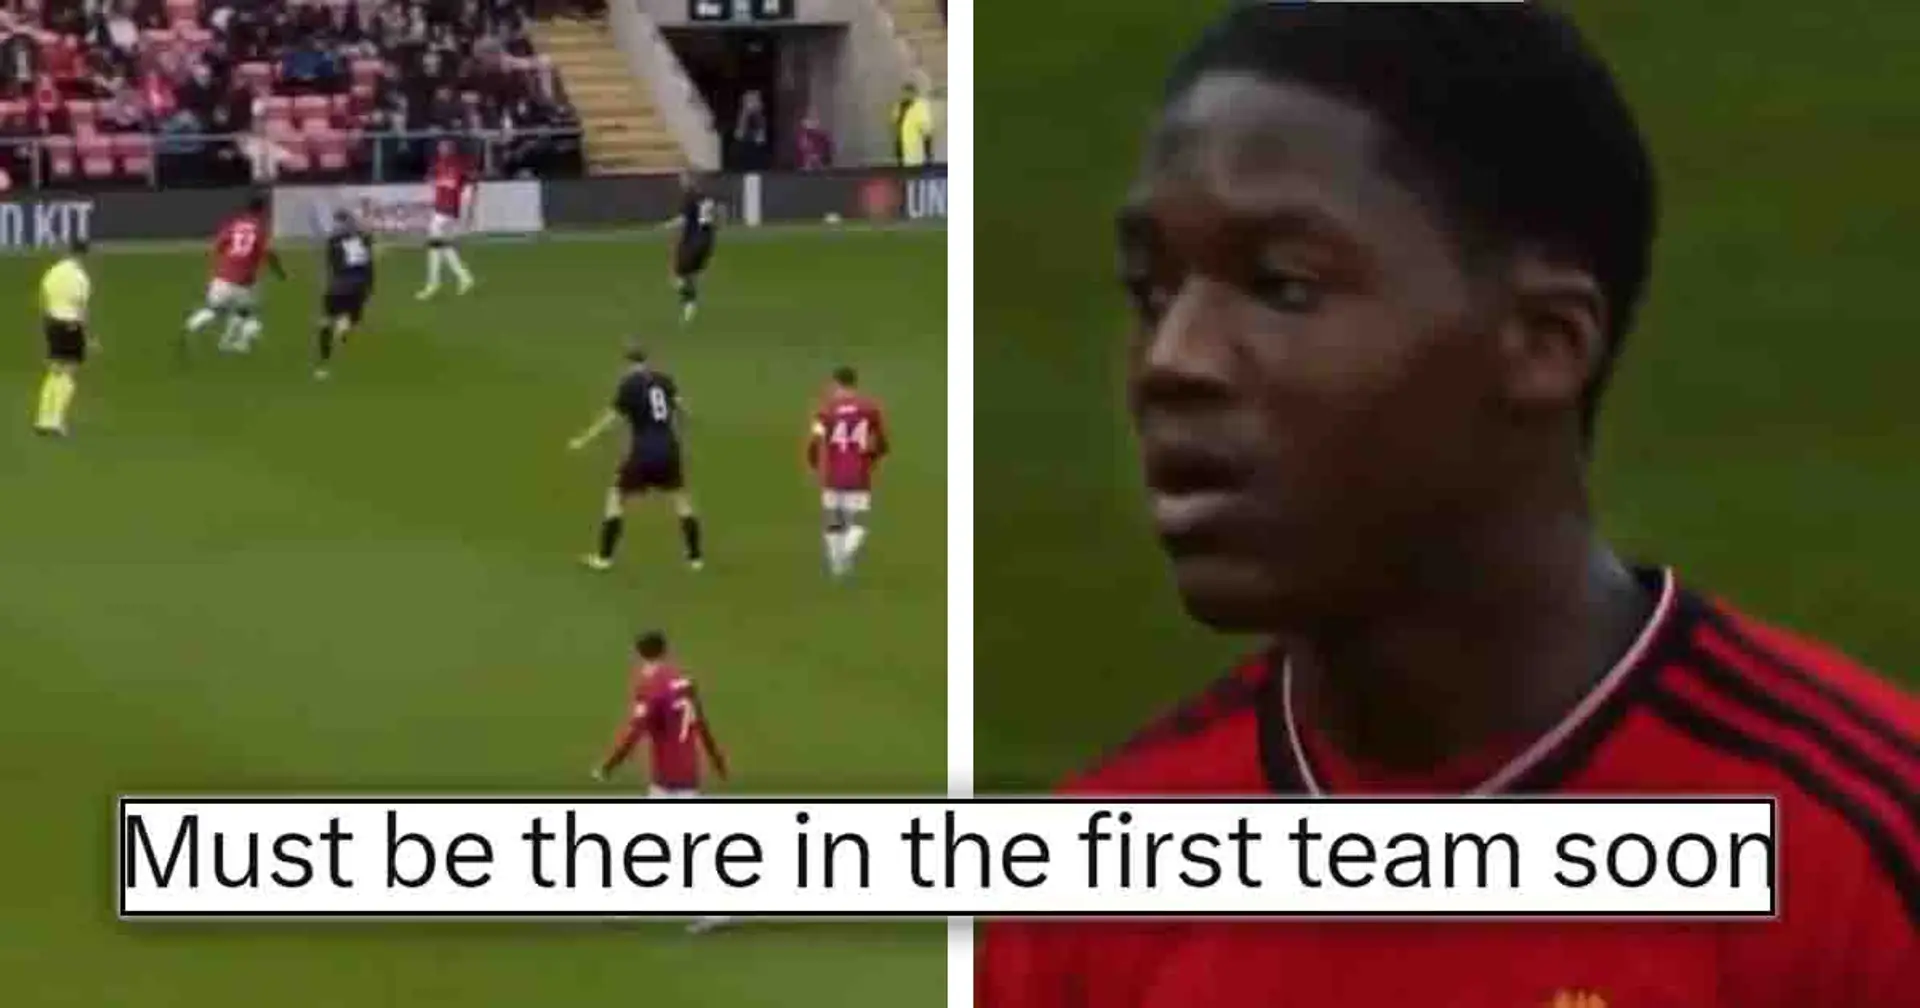 'Looked sharp out there': Man United fans react as Mainoo returns to action in UEFA Youth League clash